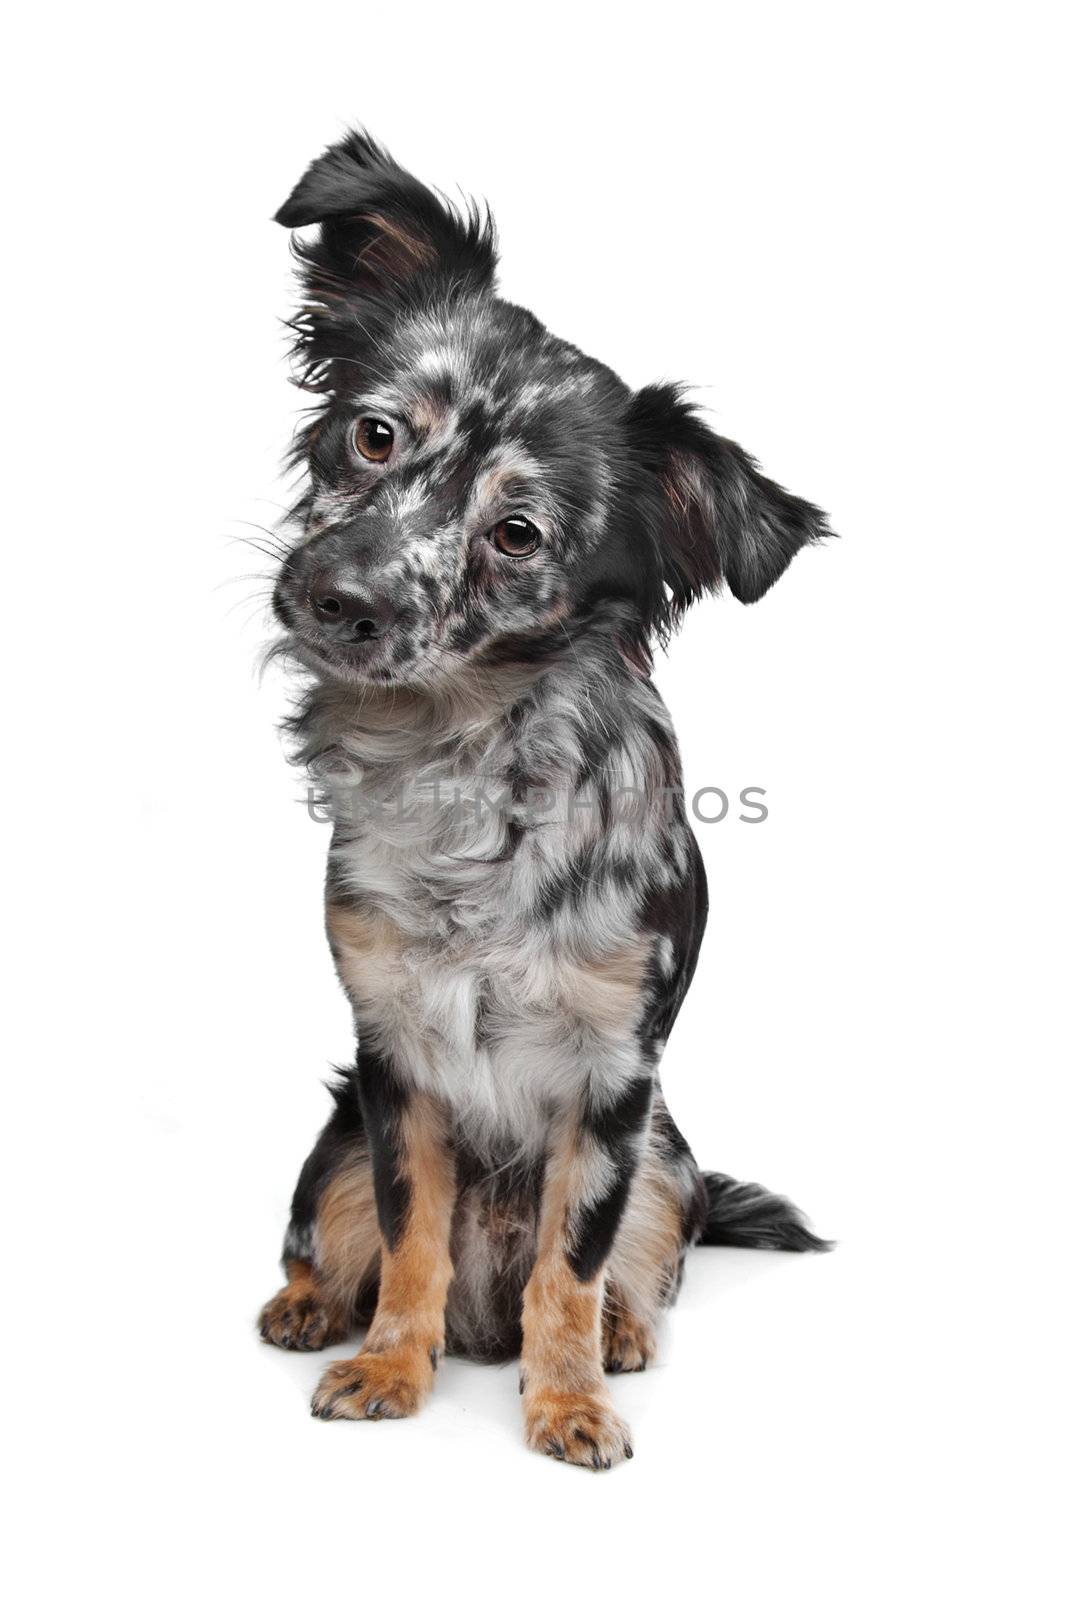 Long haired chihuahua by eriklam